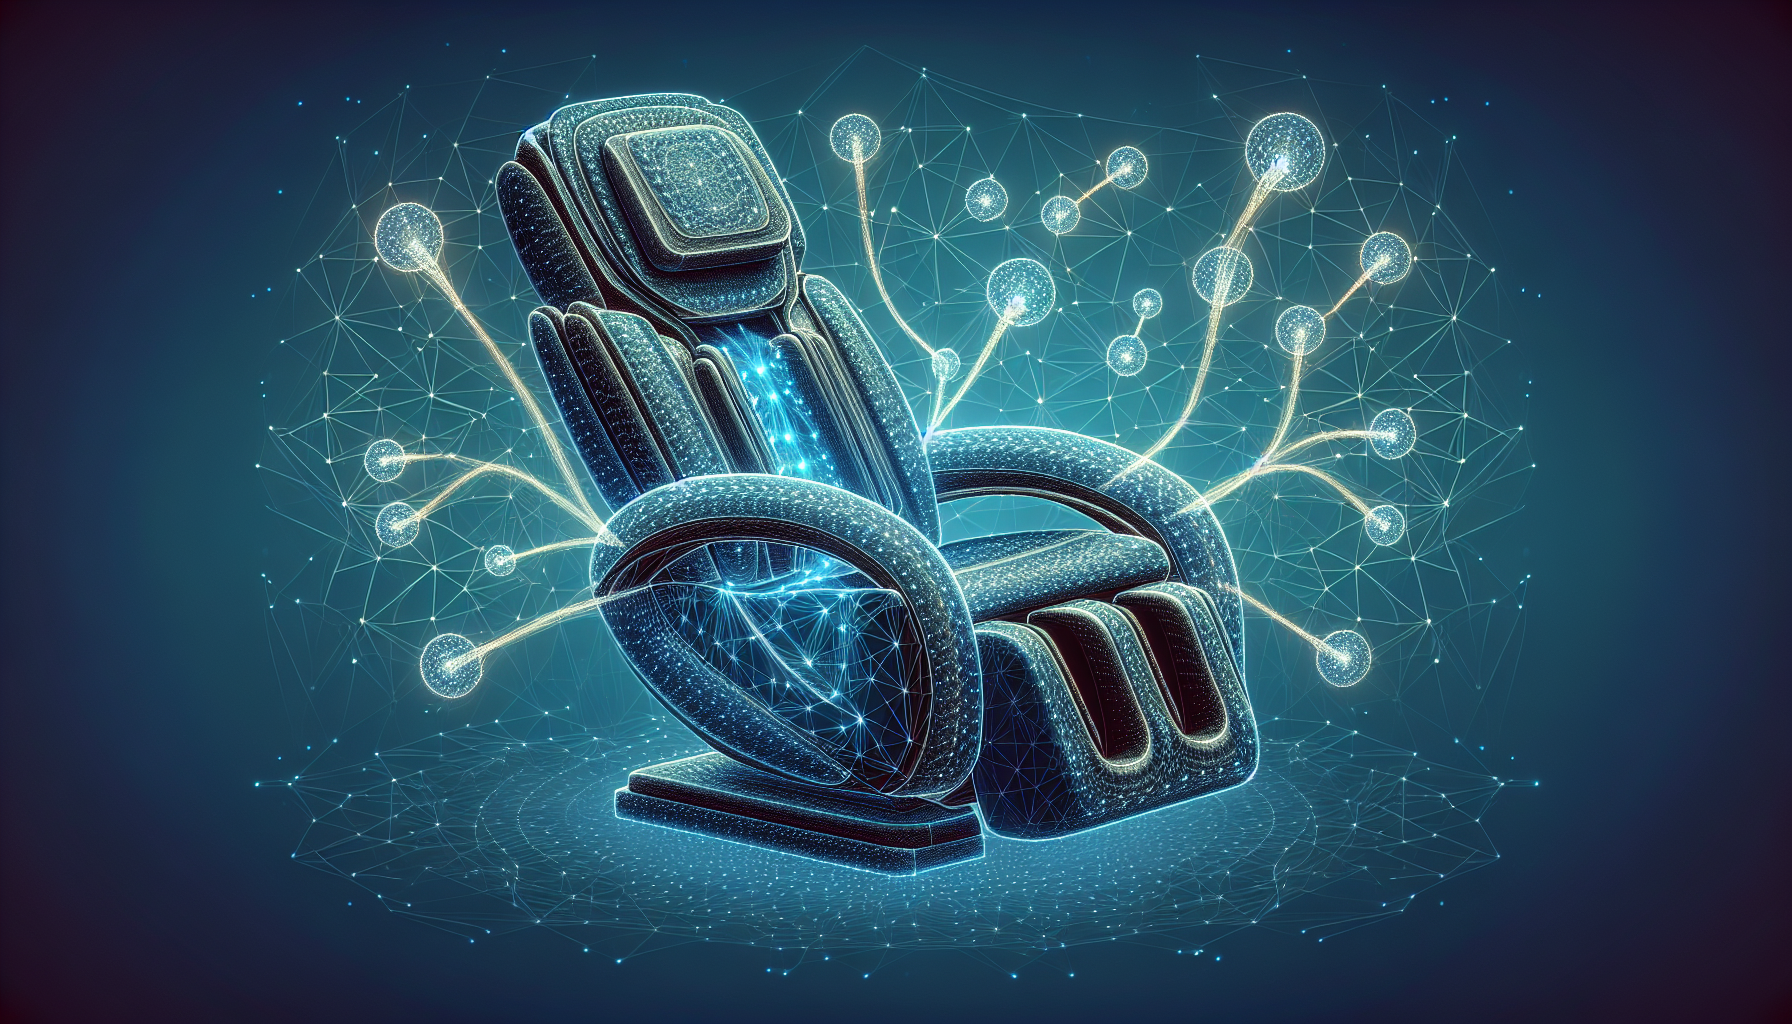 Illustration of 4D massage technology in a massage chair